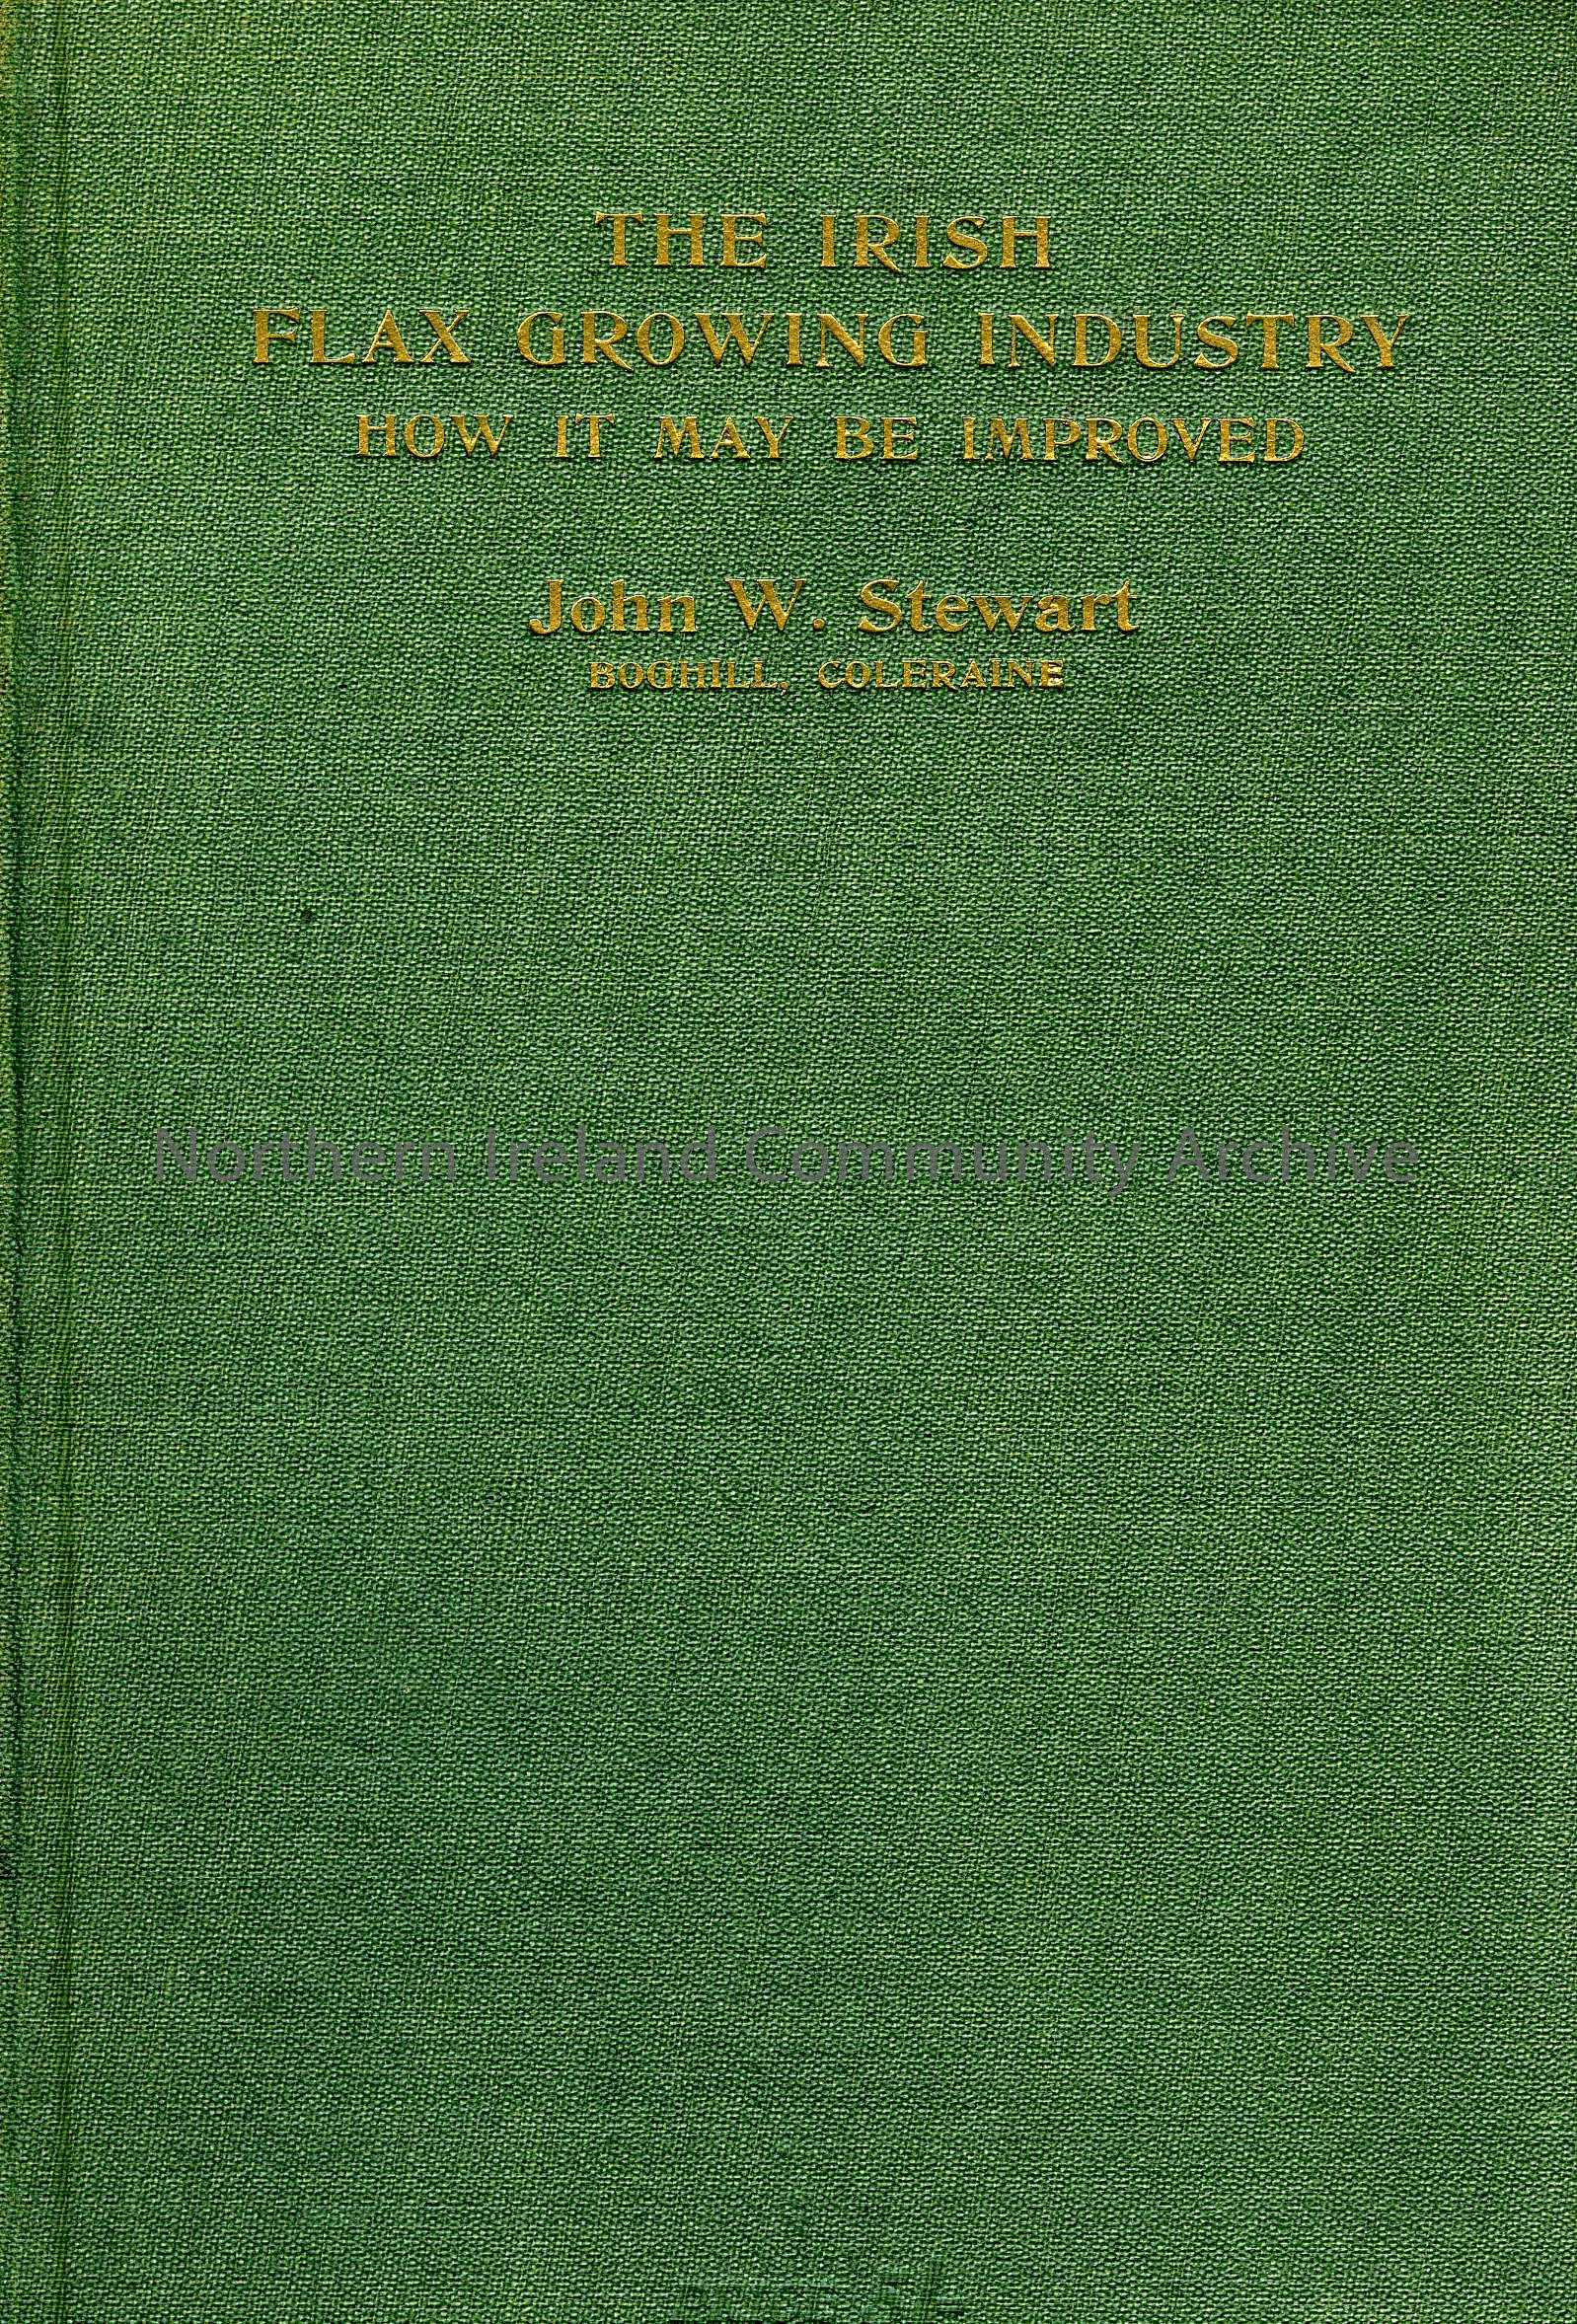 book titled, The Irish Flax Growing Industry. How It May Be Improved. By John W.Stewart (1853)